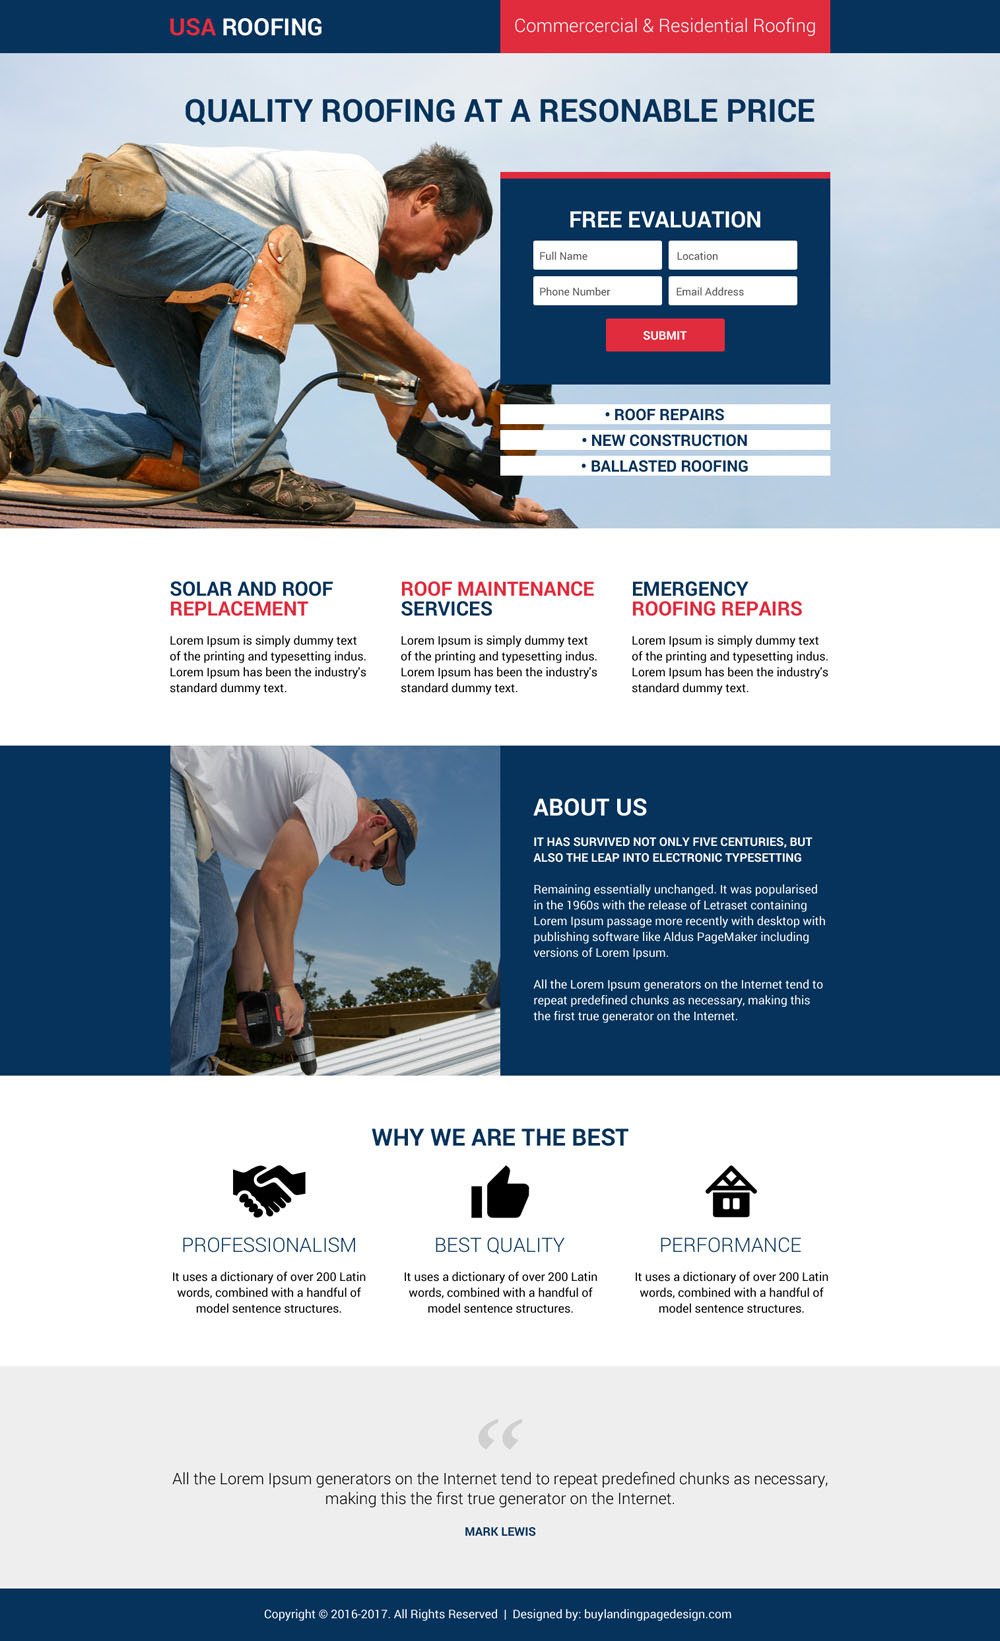 Quality roofing service responsive landing page